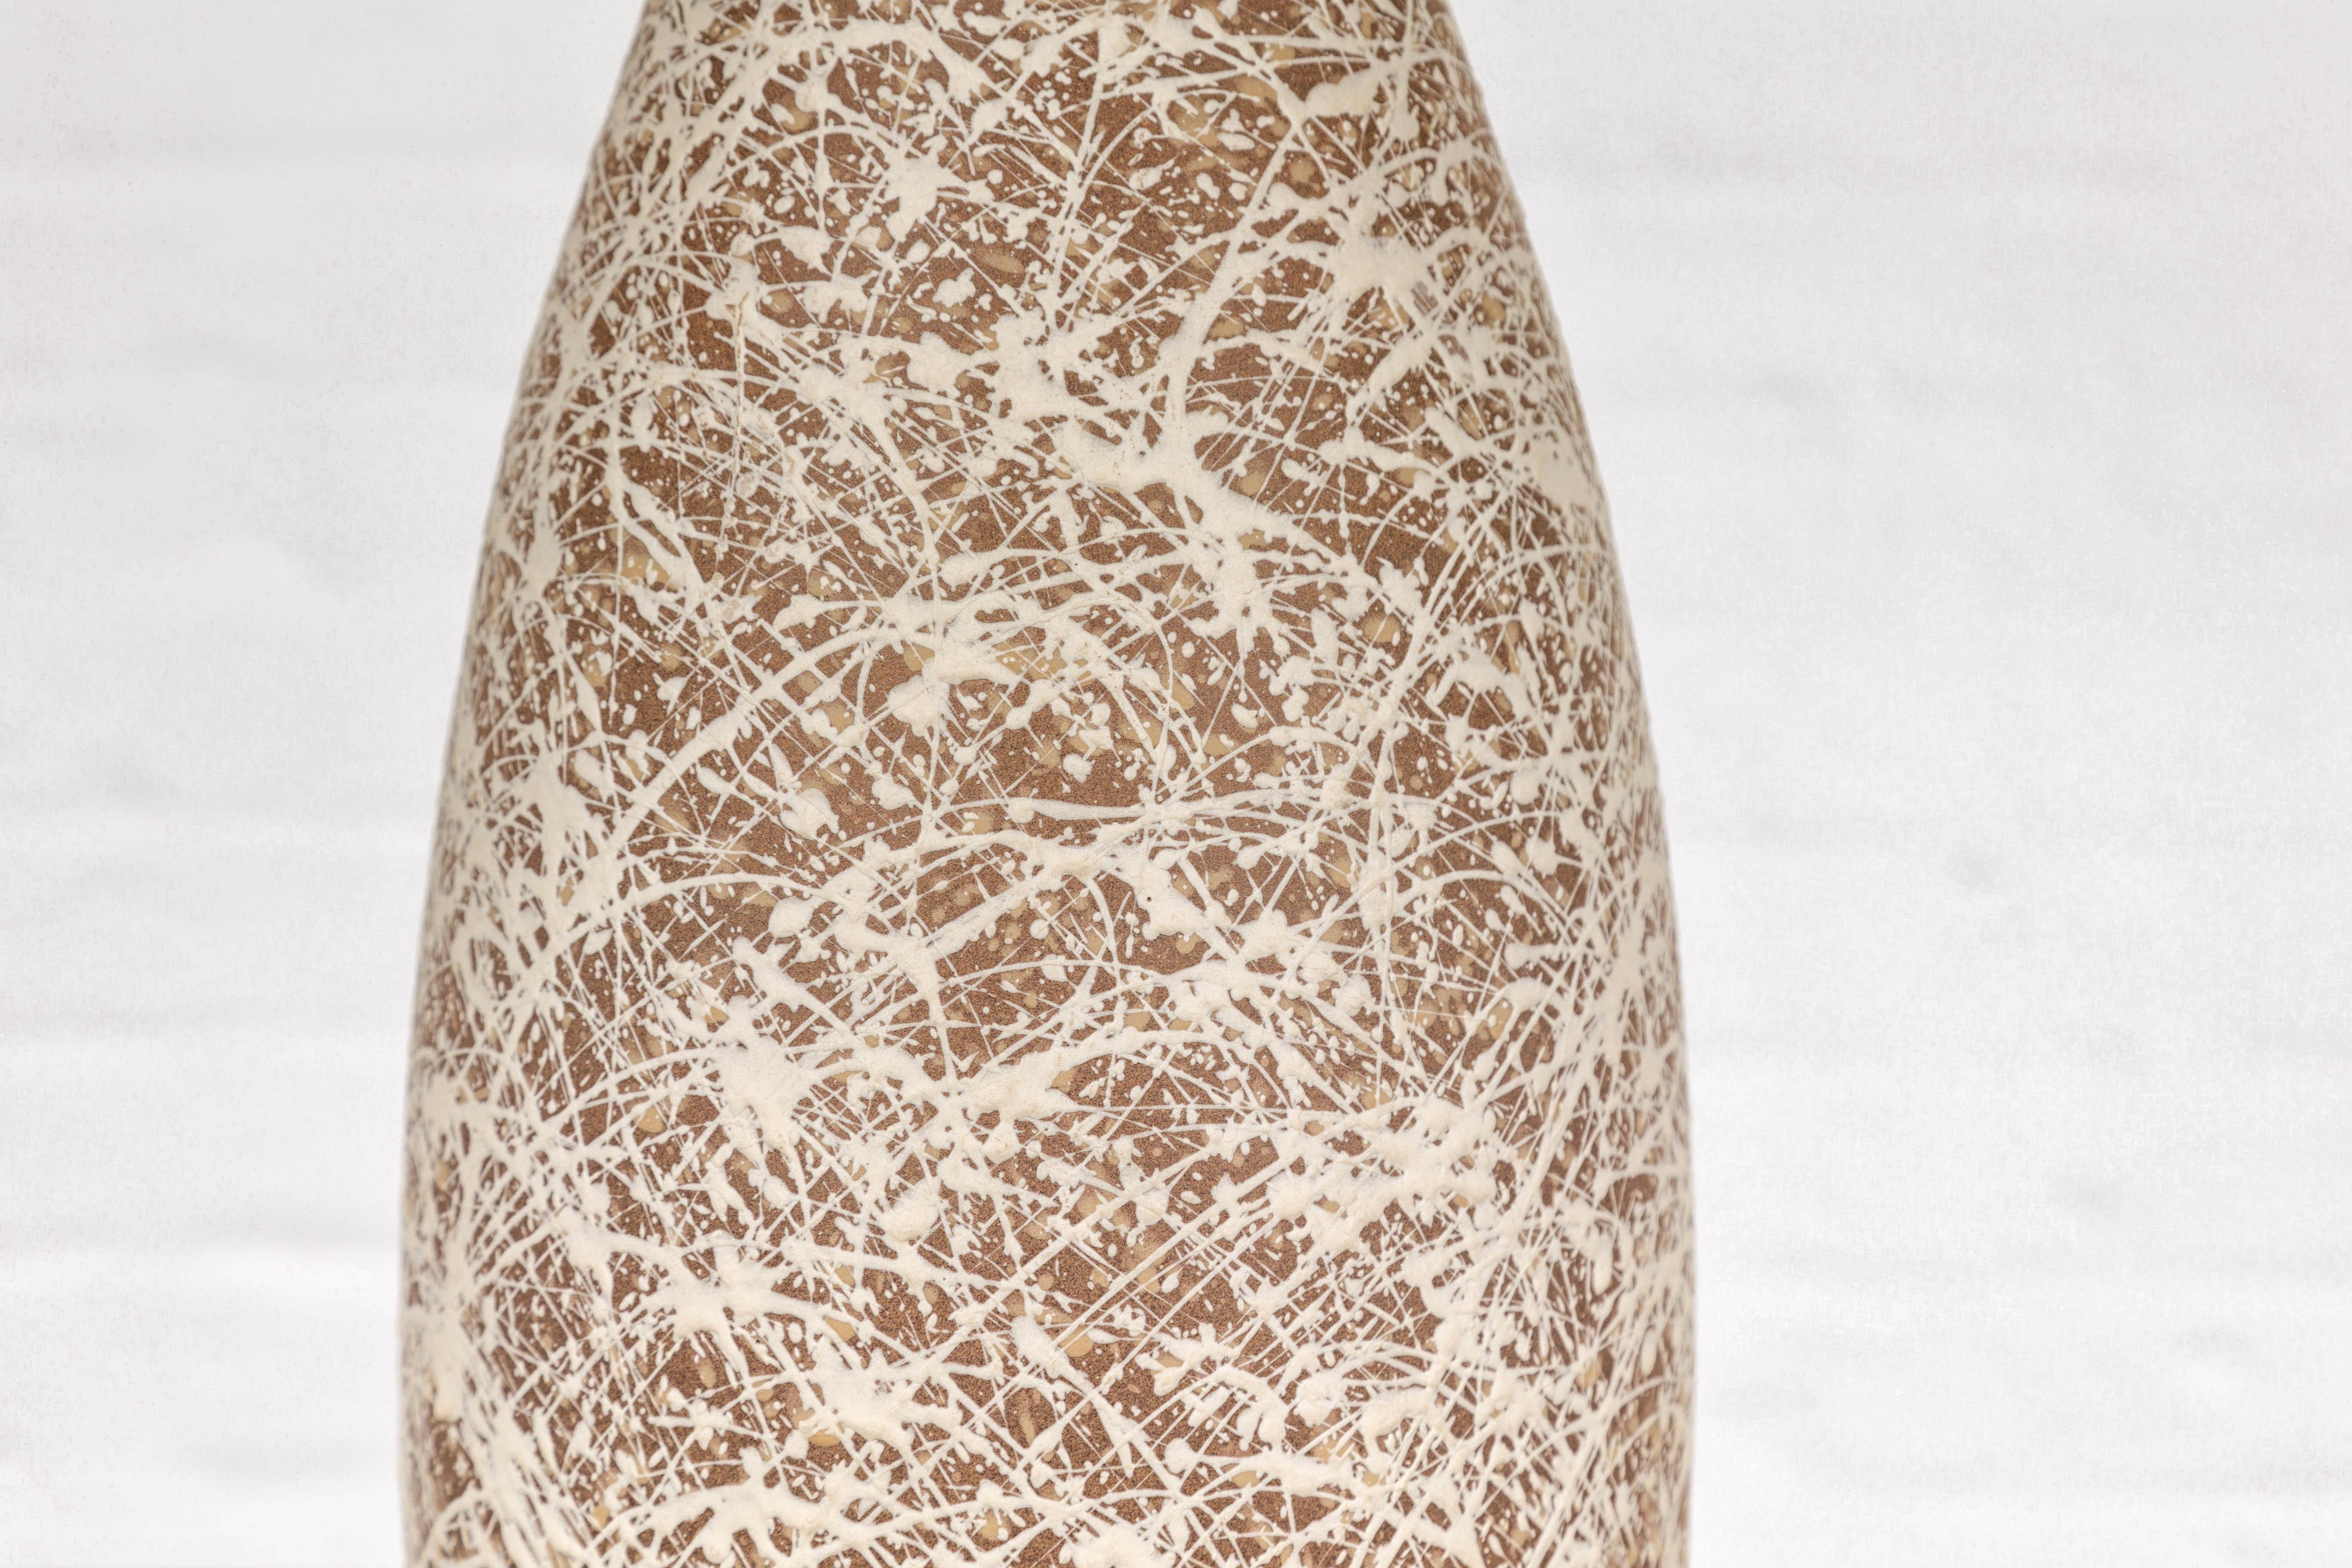 Hand-Crafted Artisan Bottle Shaped Brown and Cream Ceramic Vase with Dripping For Sale 2